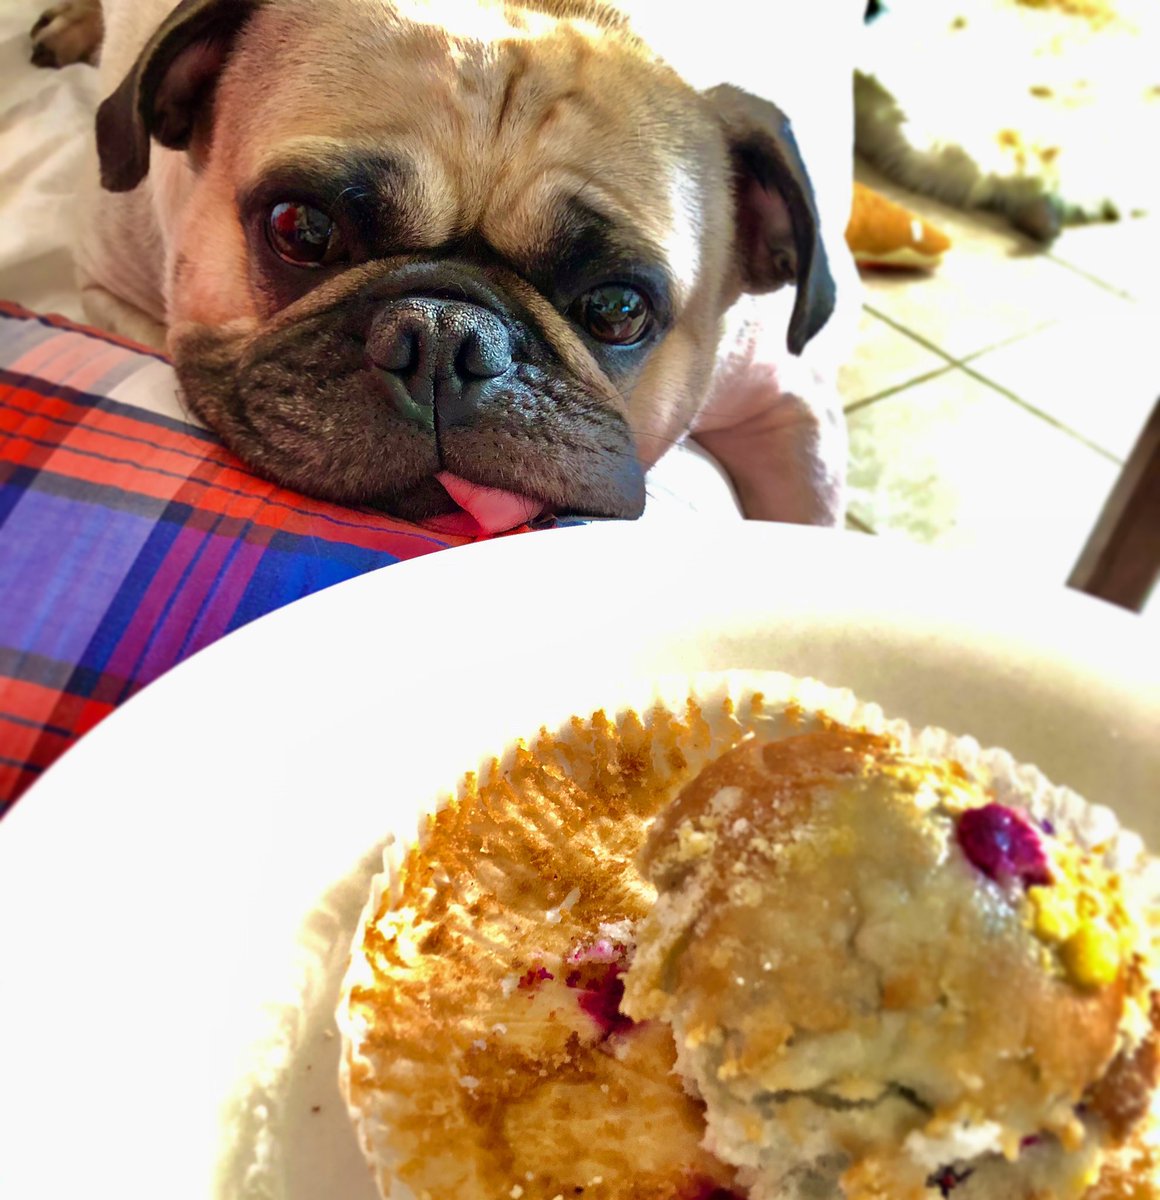 “I spy wif my widdle eyes... “ 👀 -Max

#max #pug #dog #spy #snoopdogg #eyes #muffin #snoopy #see #look #doggo #foodie #yummy #delicious #eat #pastry #ittakesathief #doglife #doglover #hugs #kisses #loveyou #loveyoutothemoonandback #love